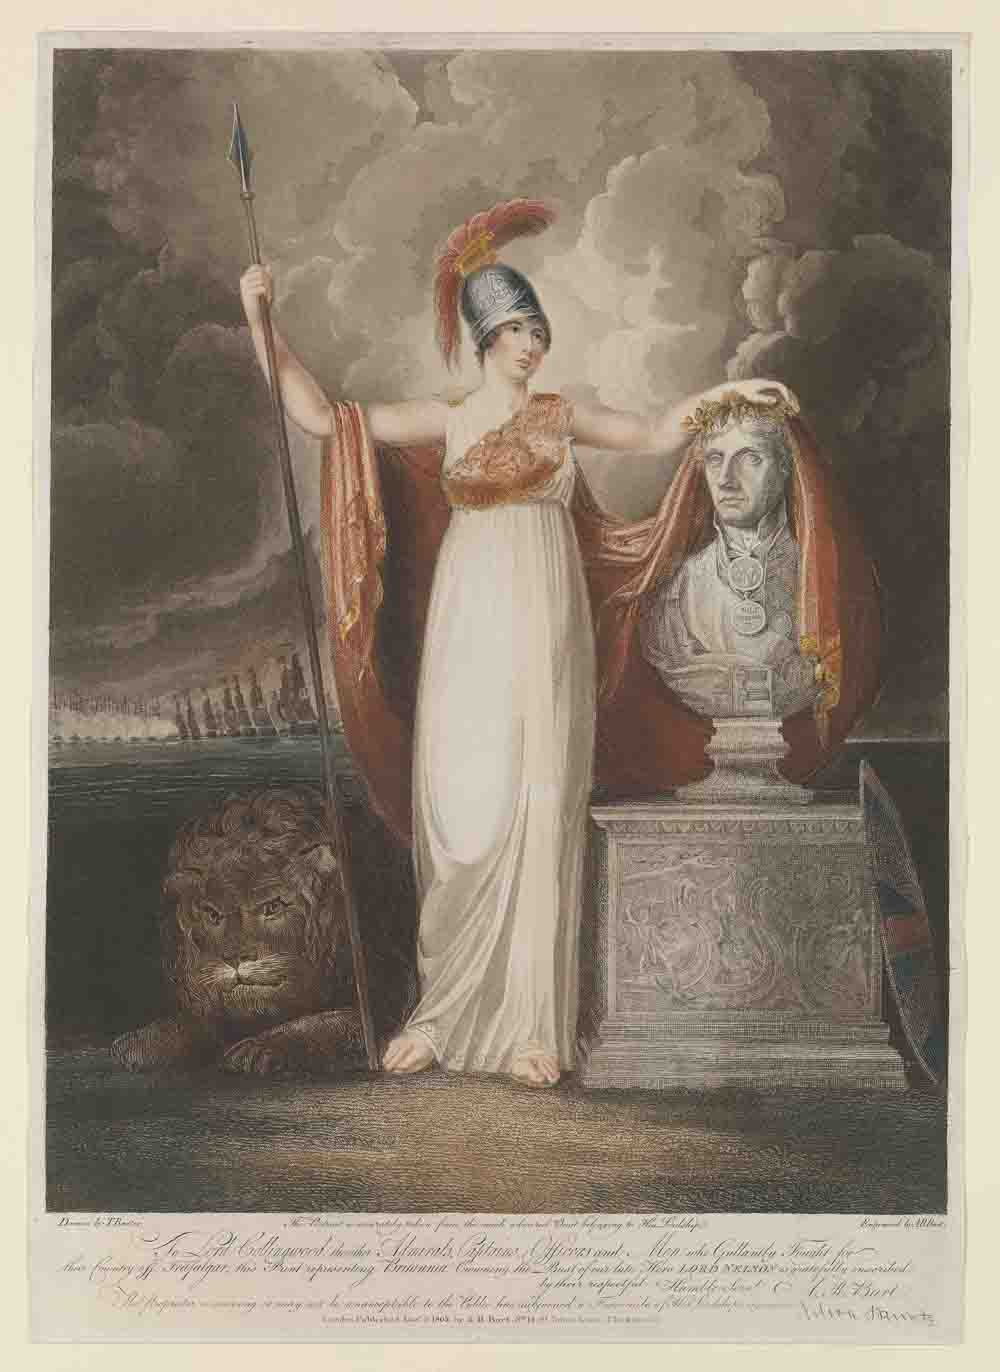 Britannia crowning the bust of our late hero, Lord Nelson. Engraving by A.R. Burt 